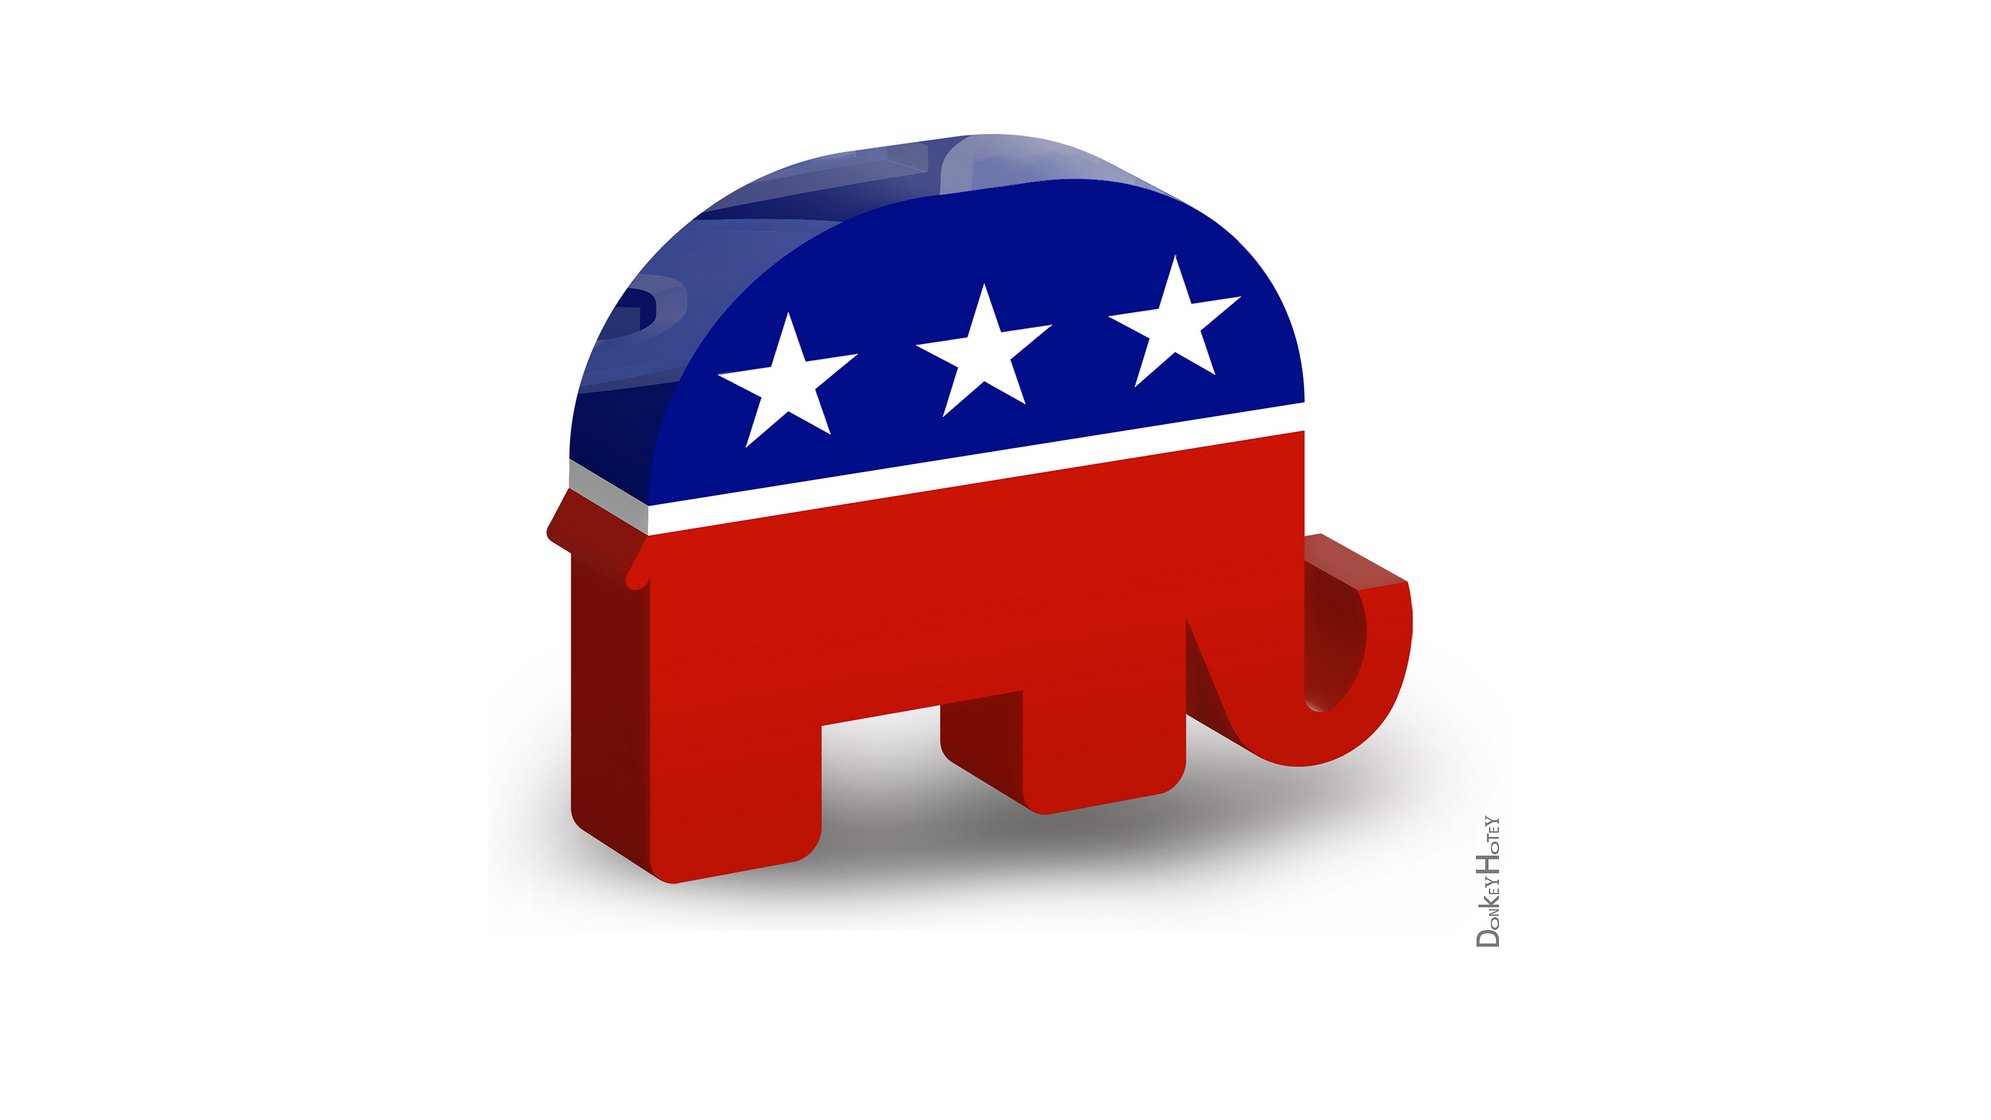 republican party logo Logospikecom Famous and Free Vector Logos